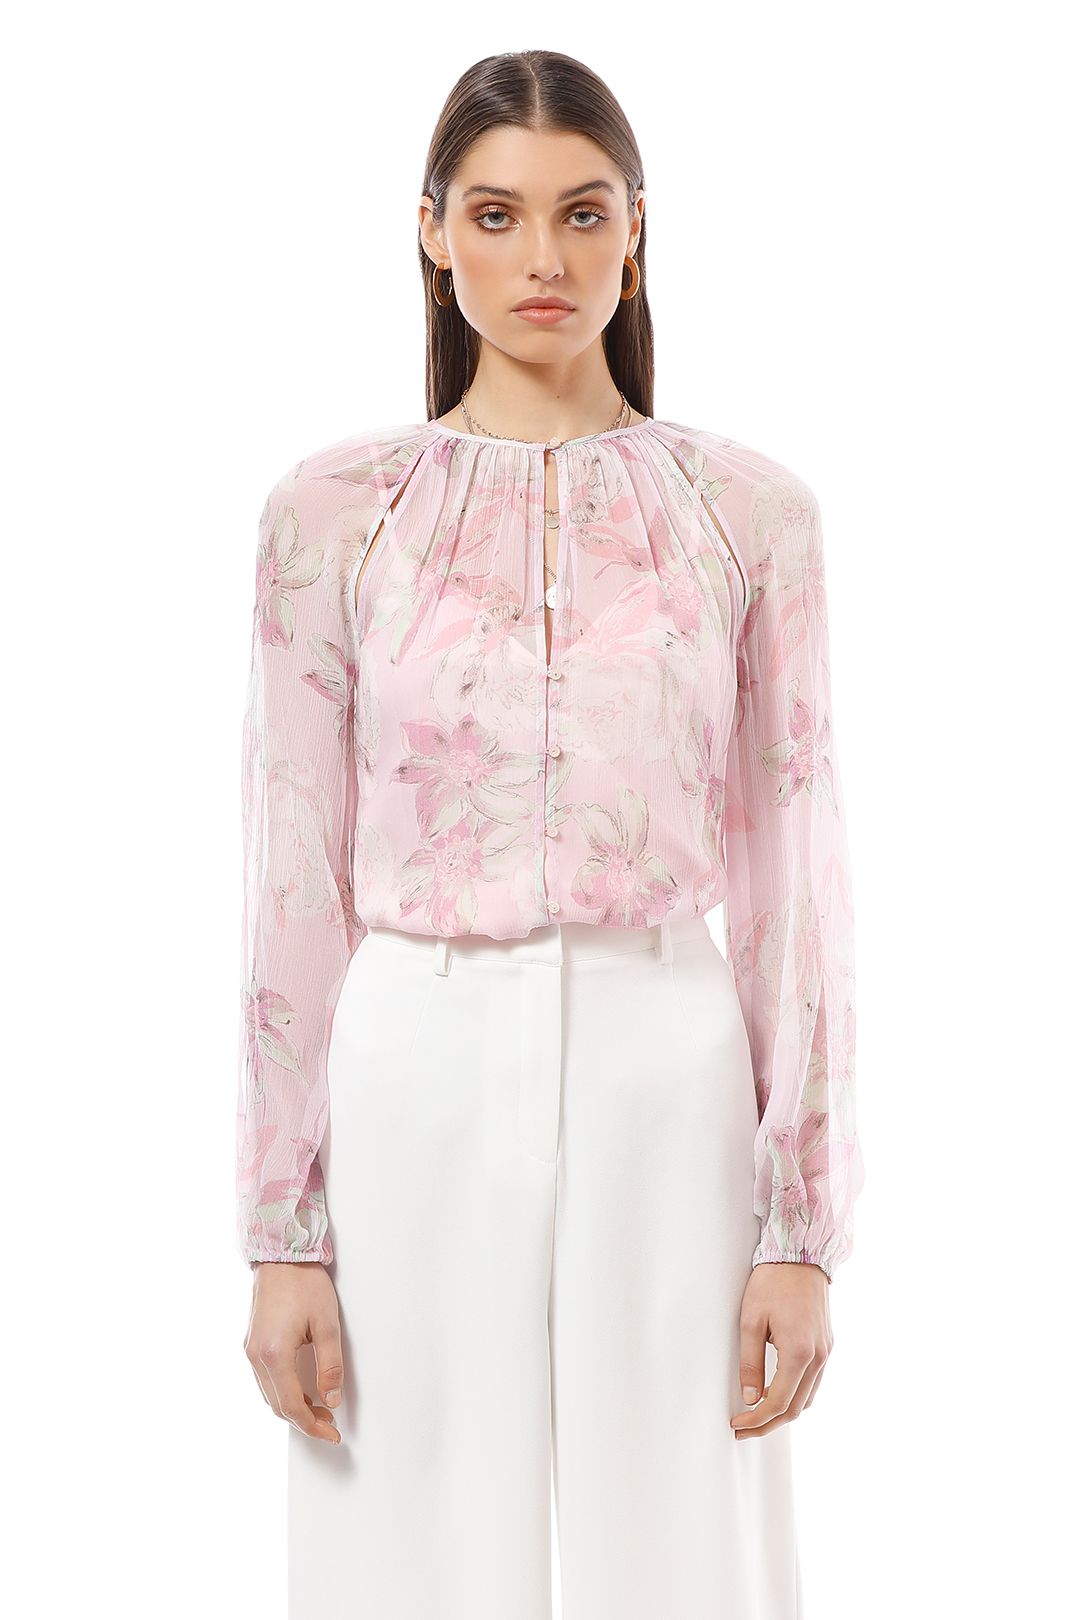 Alice McCall - Watercolour Floral Blouse - Pink Print - Front Detail